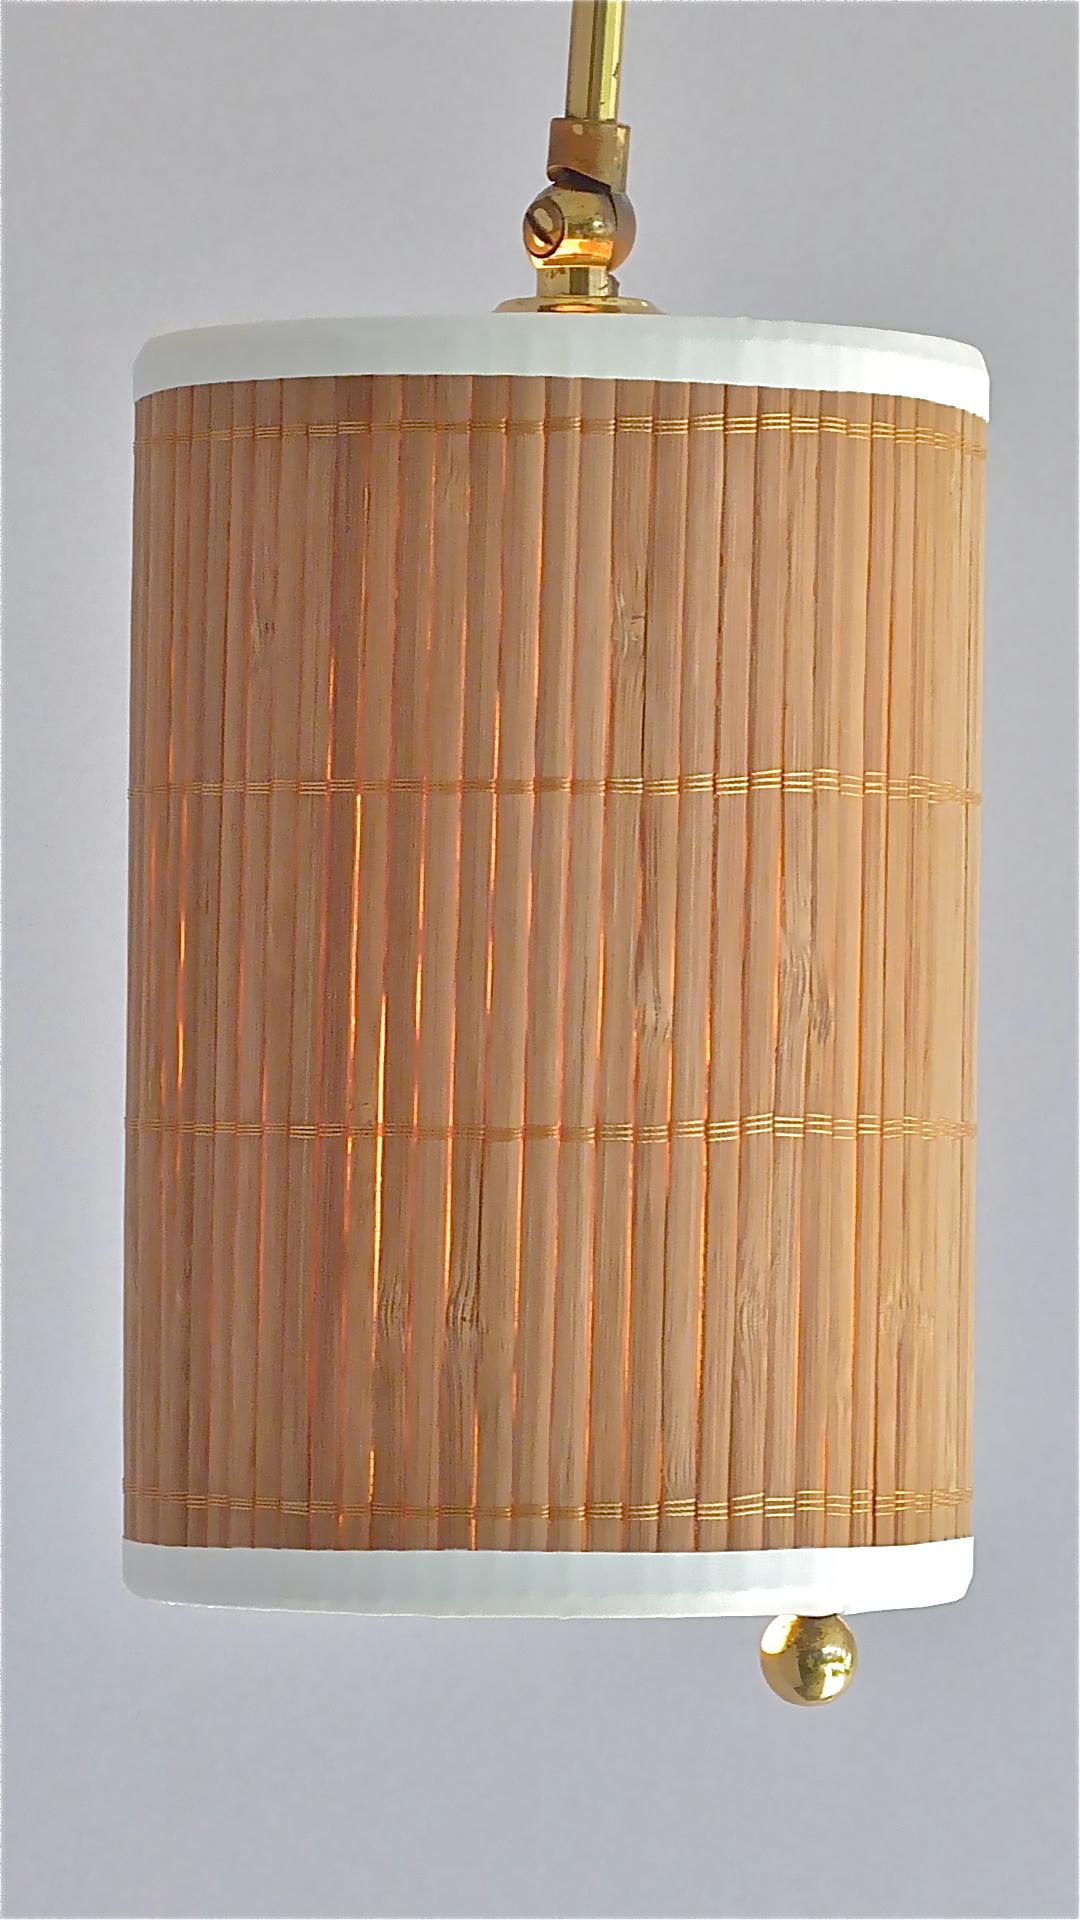 Wall Lamp Paavo Tynell Taito Oy Kalmar Style Brass Cane Wood Shade 1950s Sconce For Sale 2